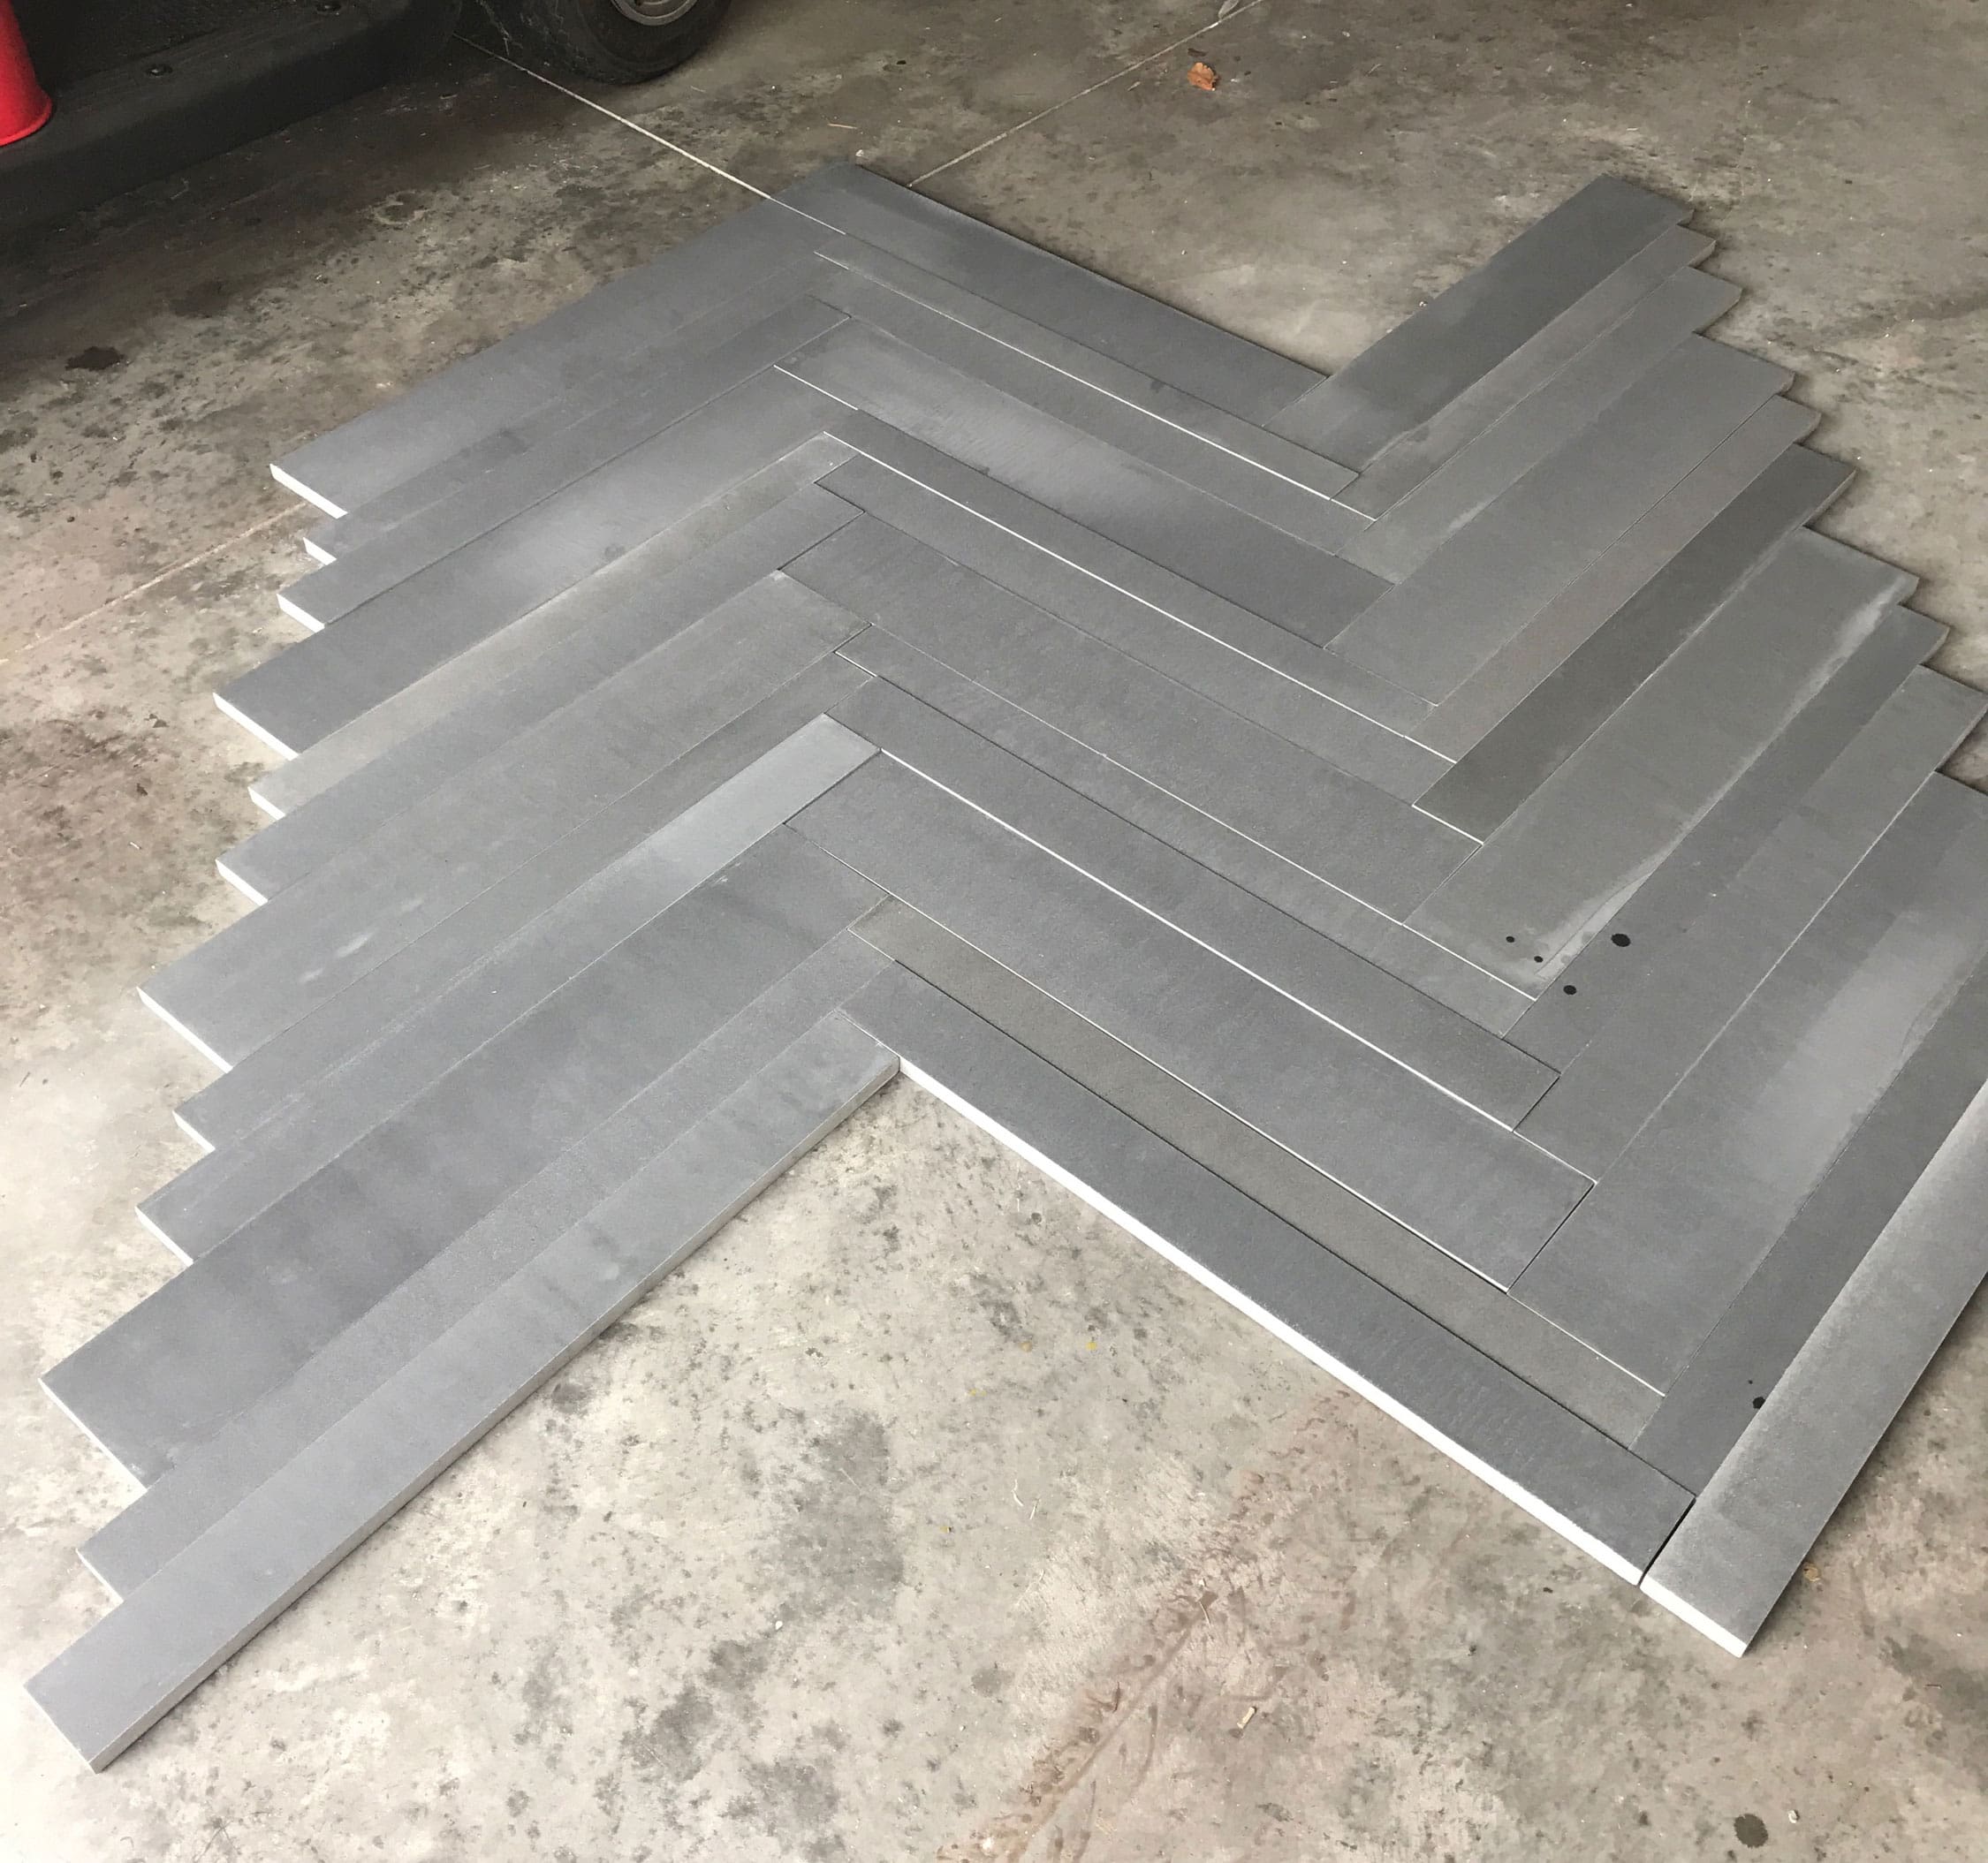 Norstone Planc in Basalt Grey laid out in a herringbone pattern